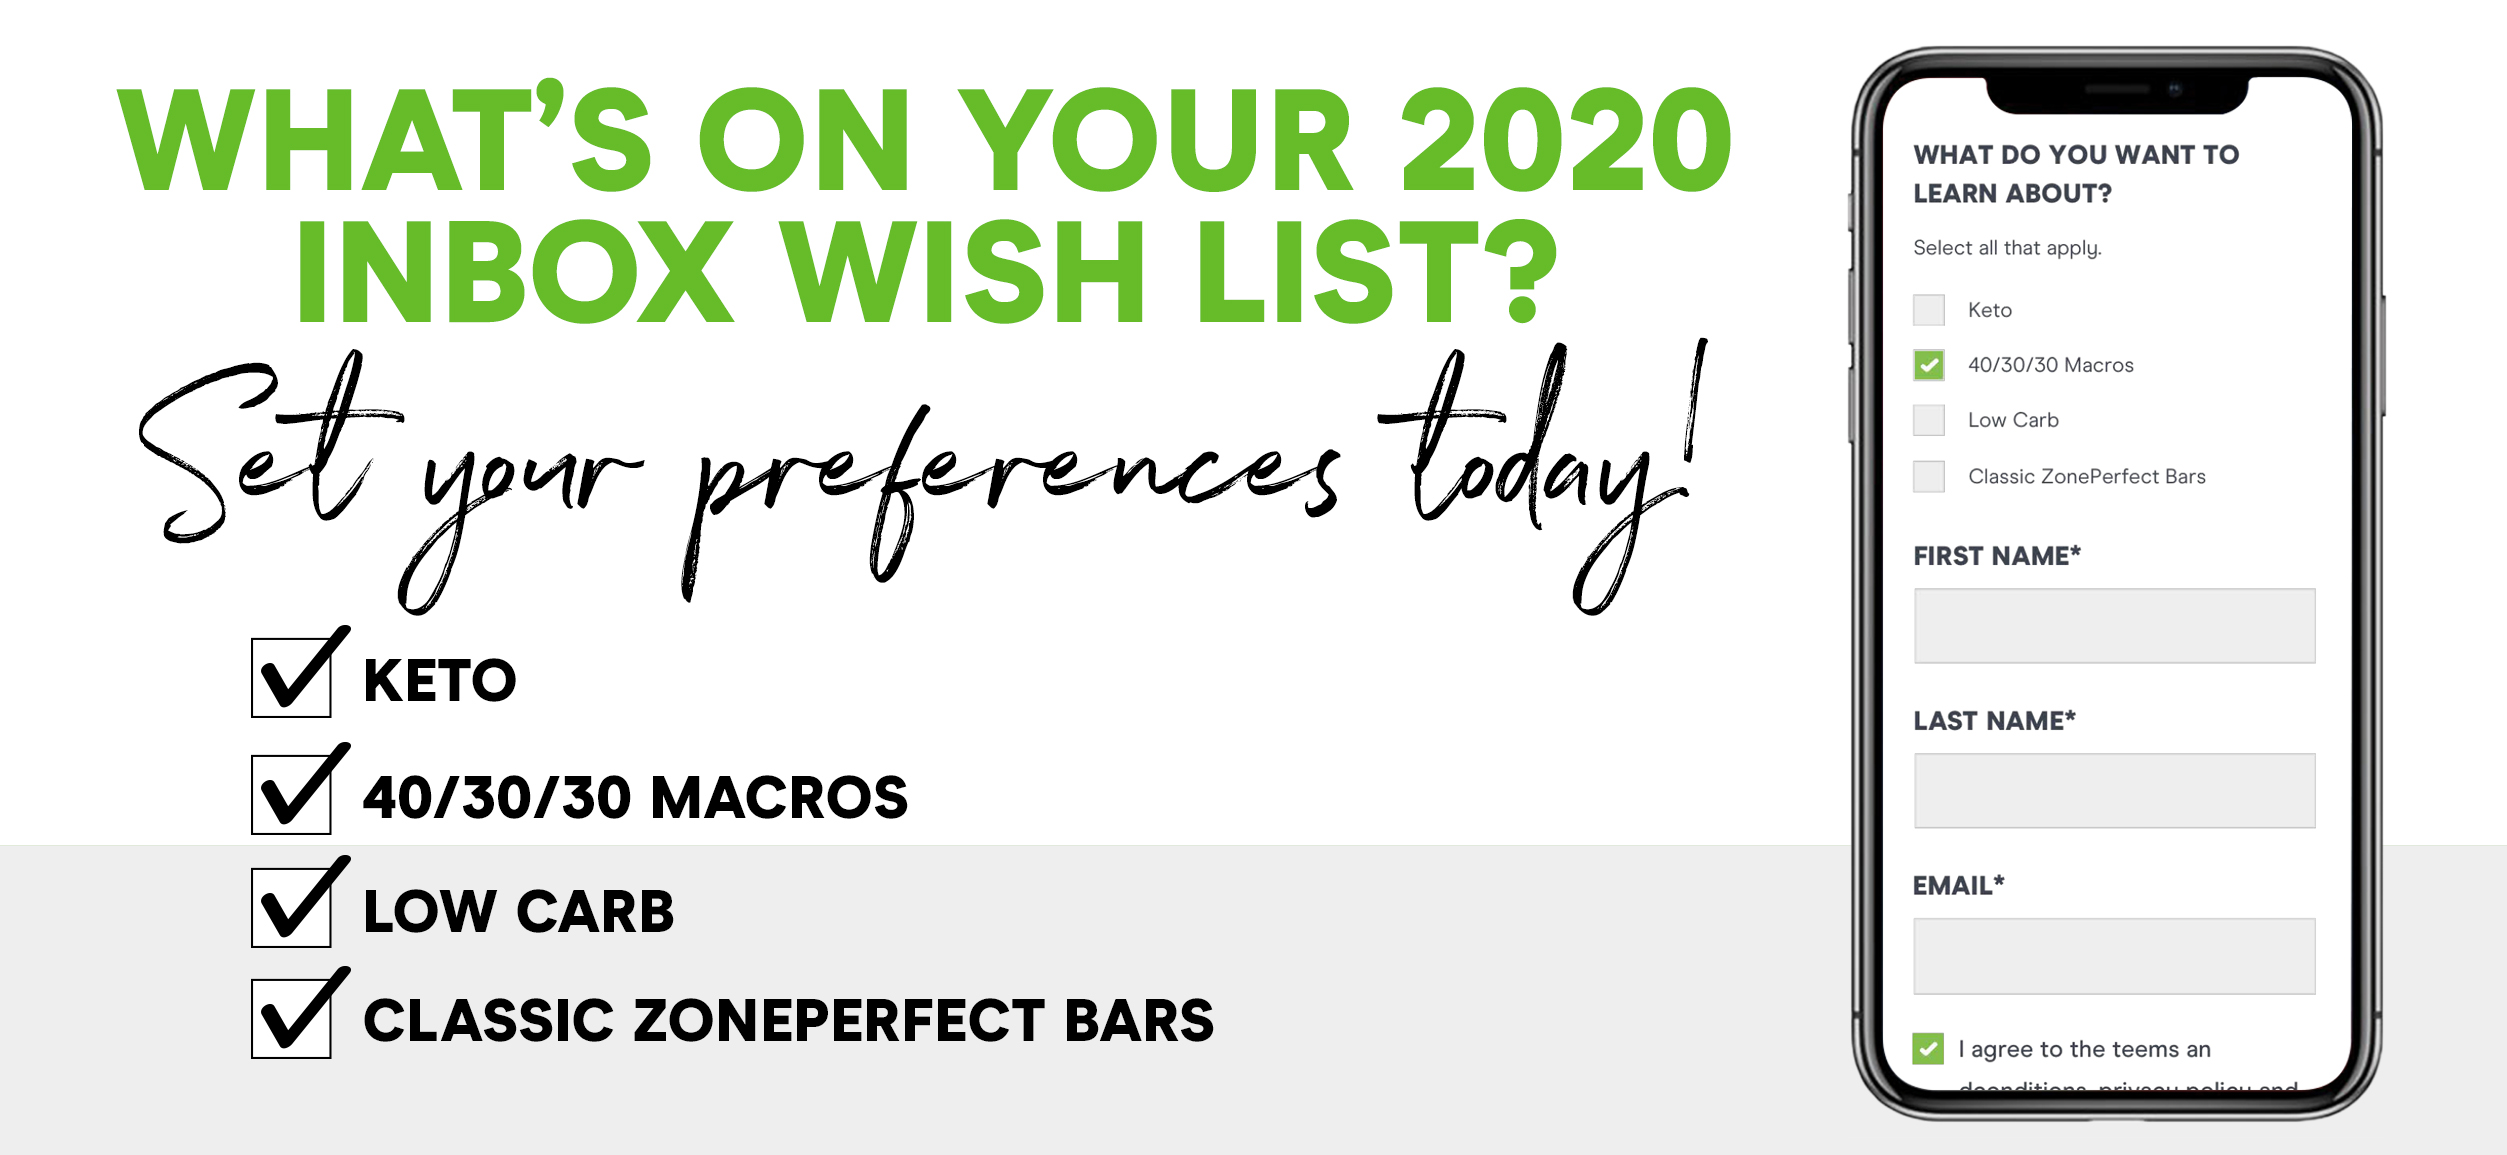 Whats on your 2020 inbox wish list? Set your preferences today!